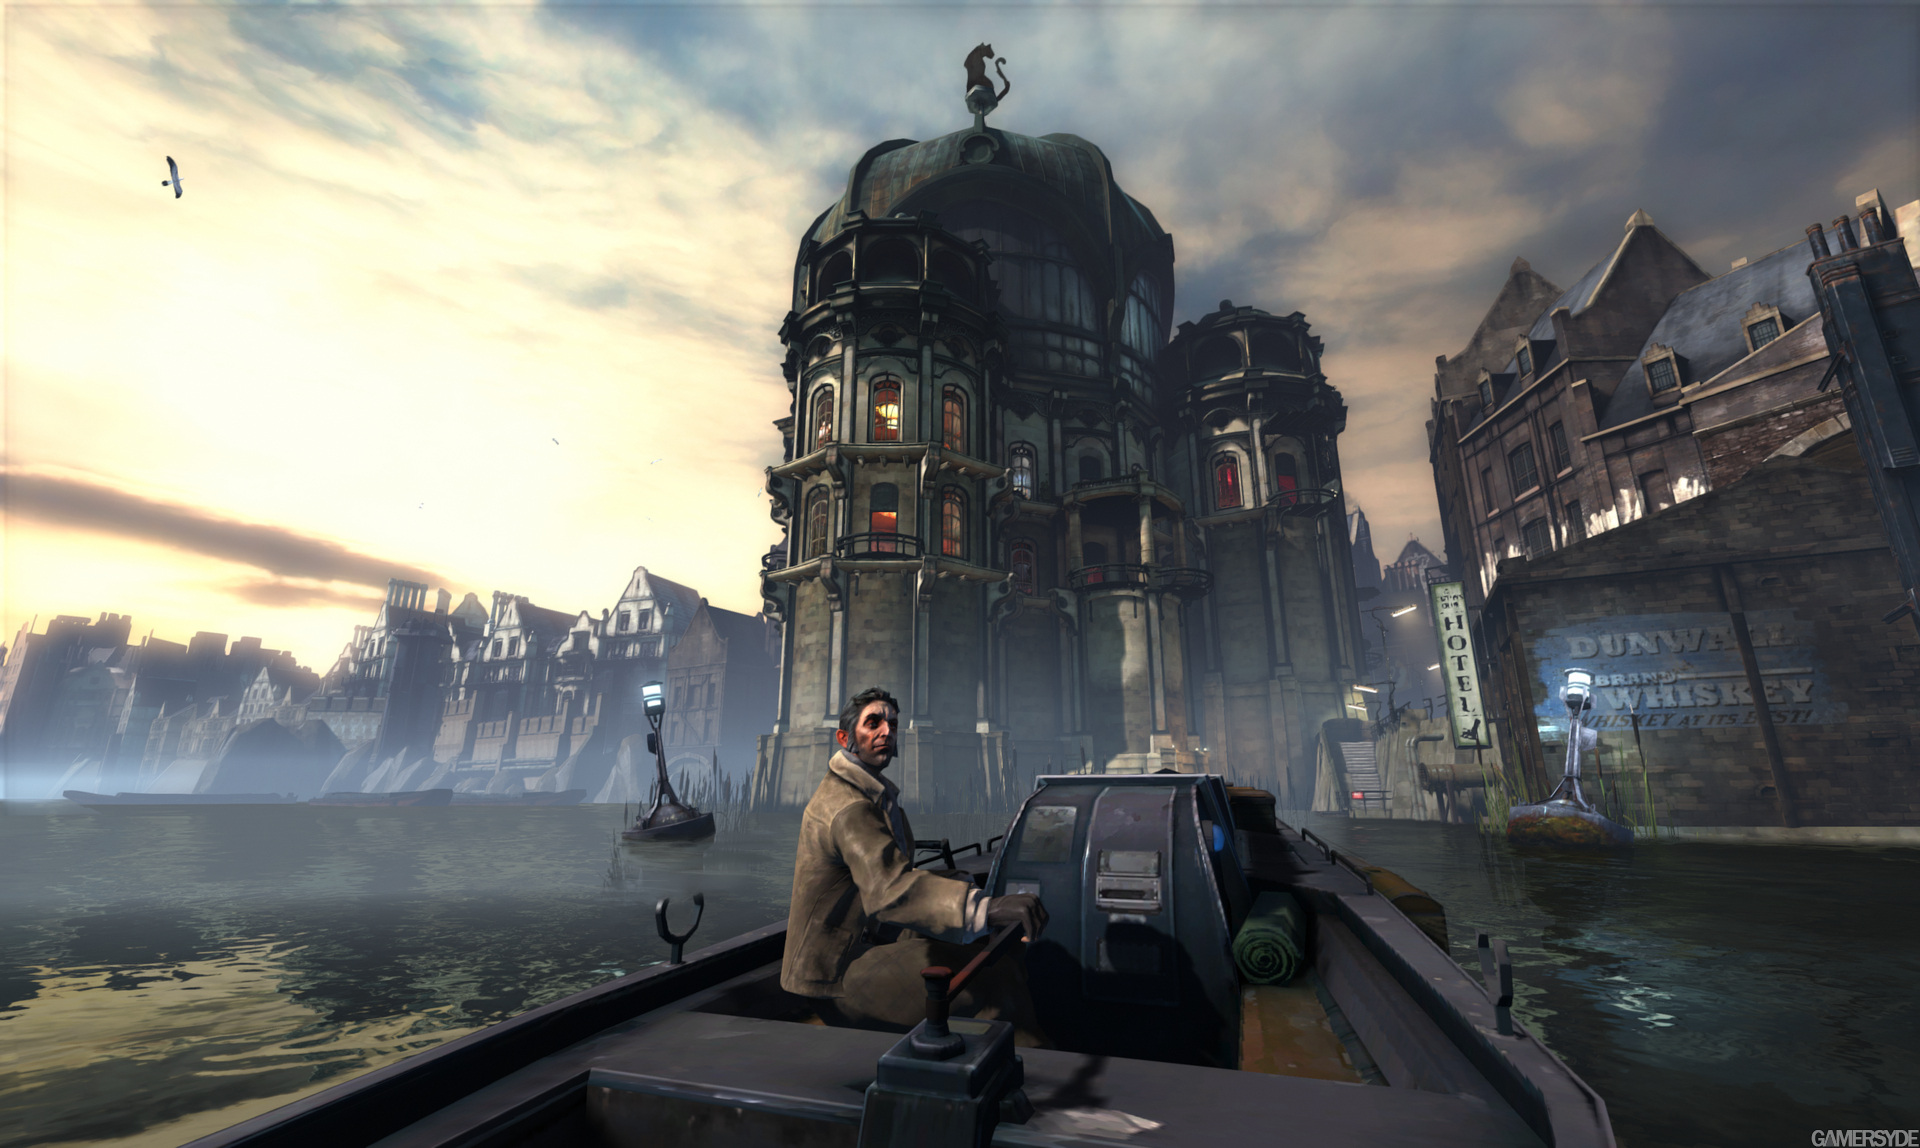 Dishonored Roleplaying Game, Dishonored Wiki